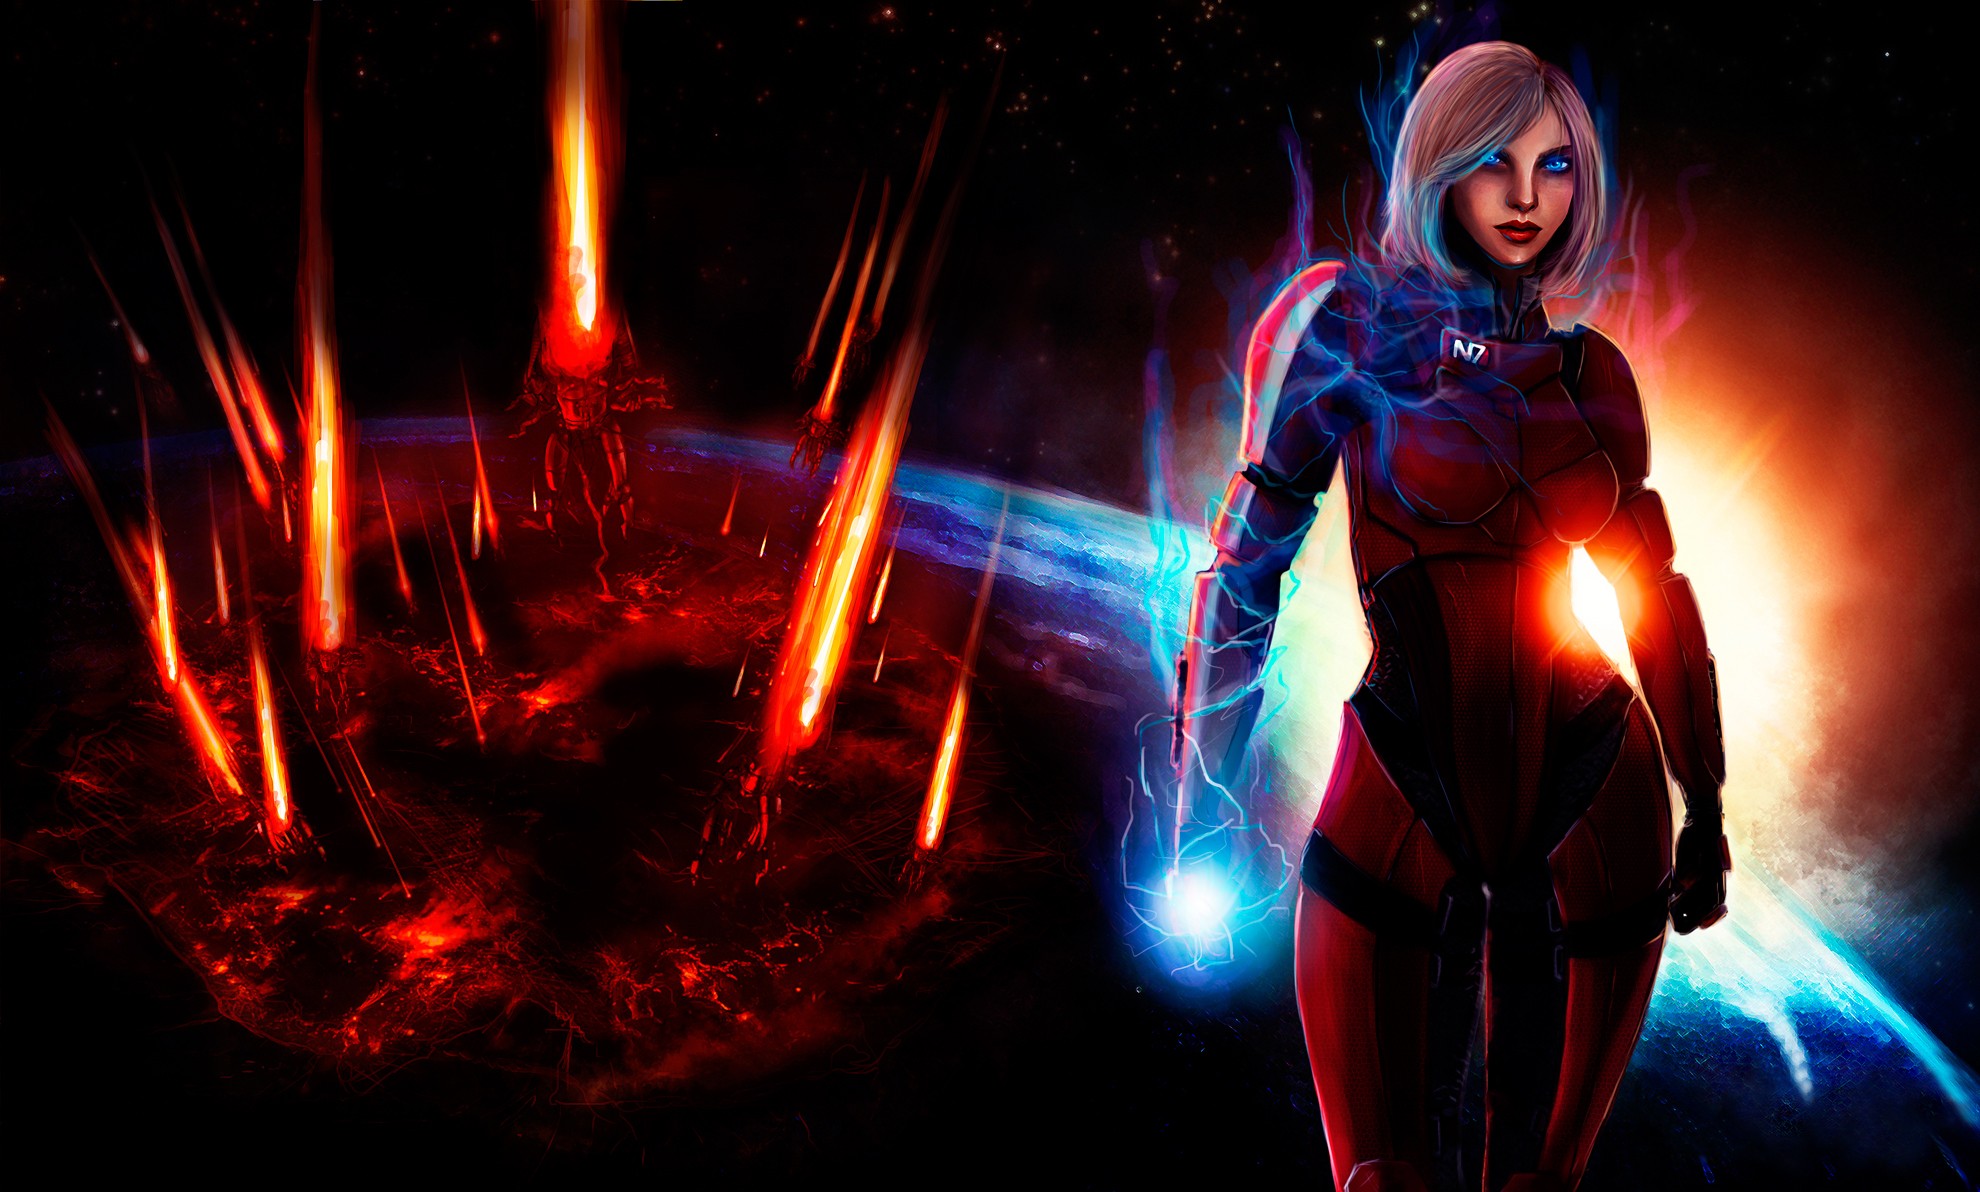 Commander Shepard, the protagonist from the video game Mass Effect 3, ready to face intergalactic challenges.